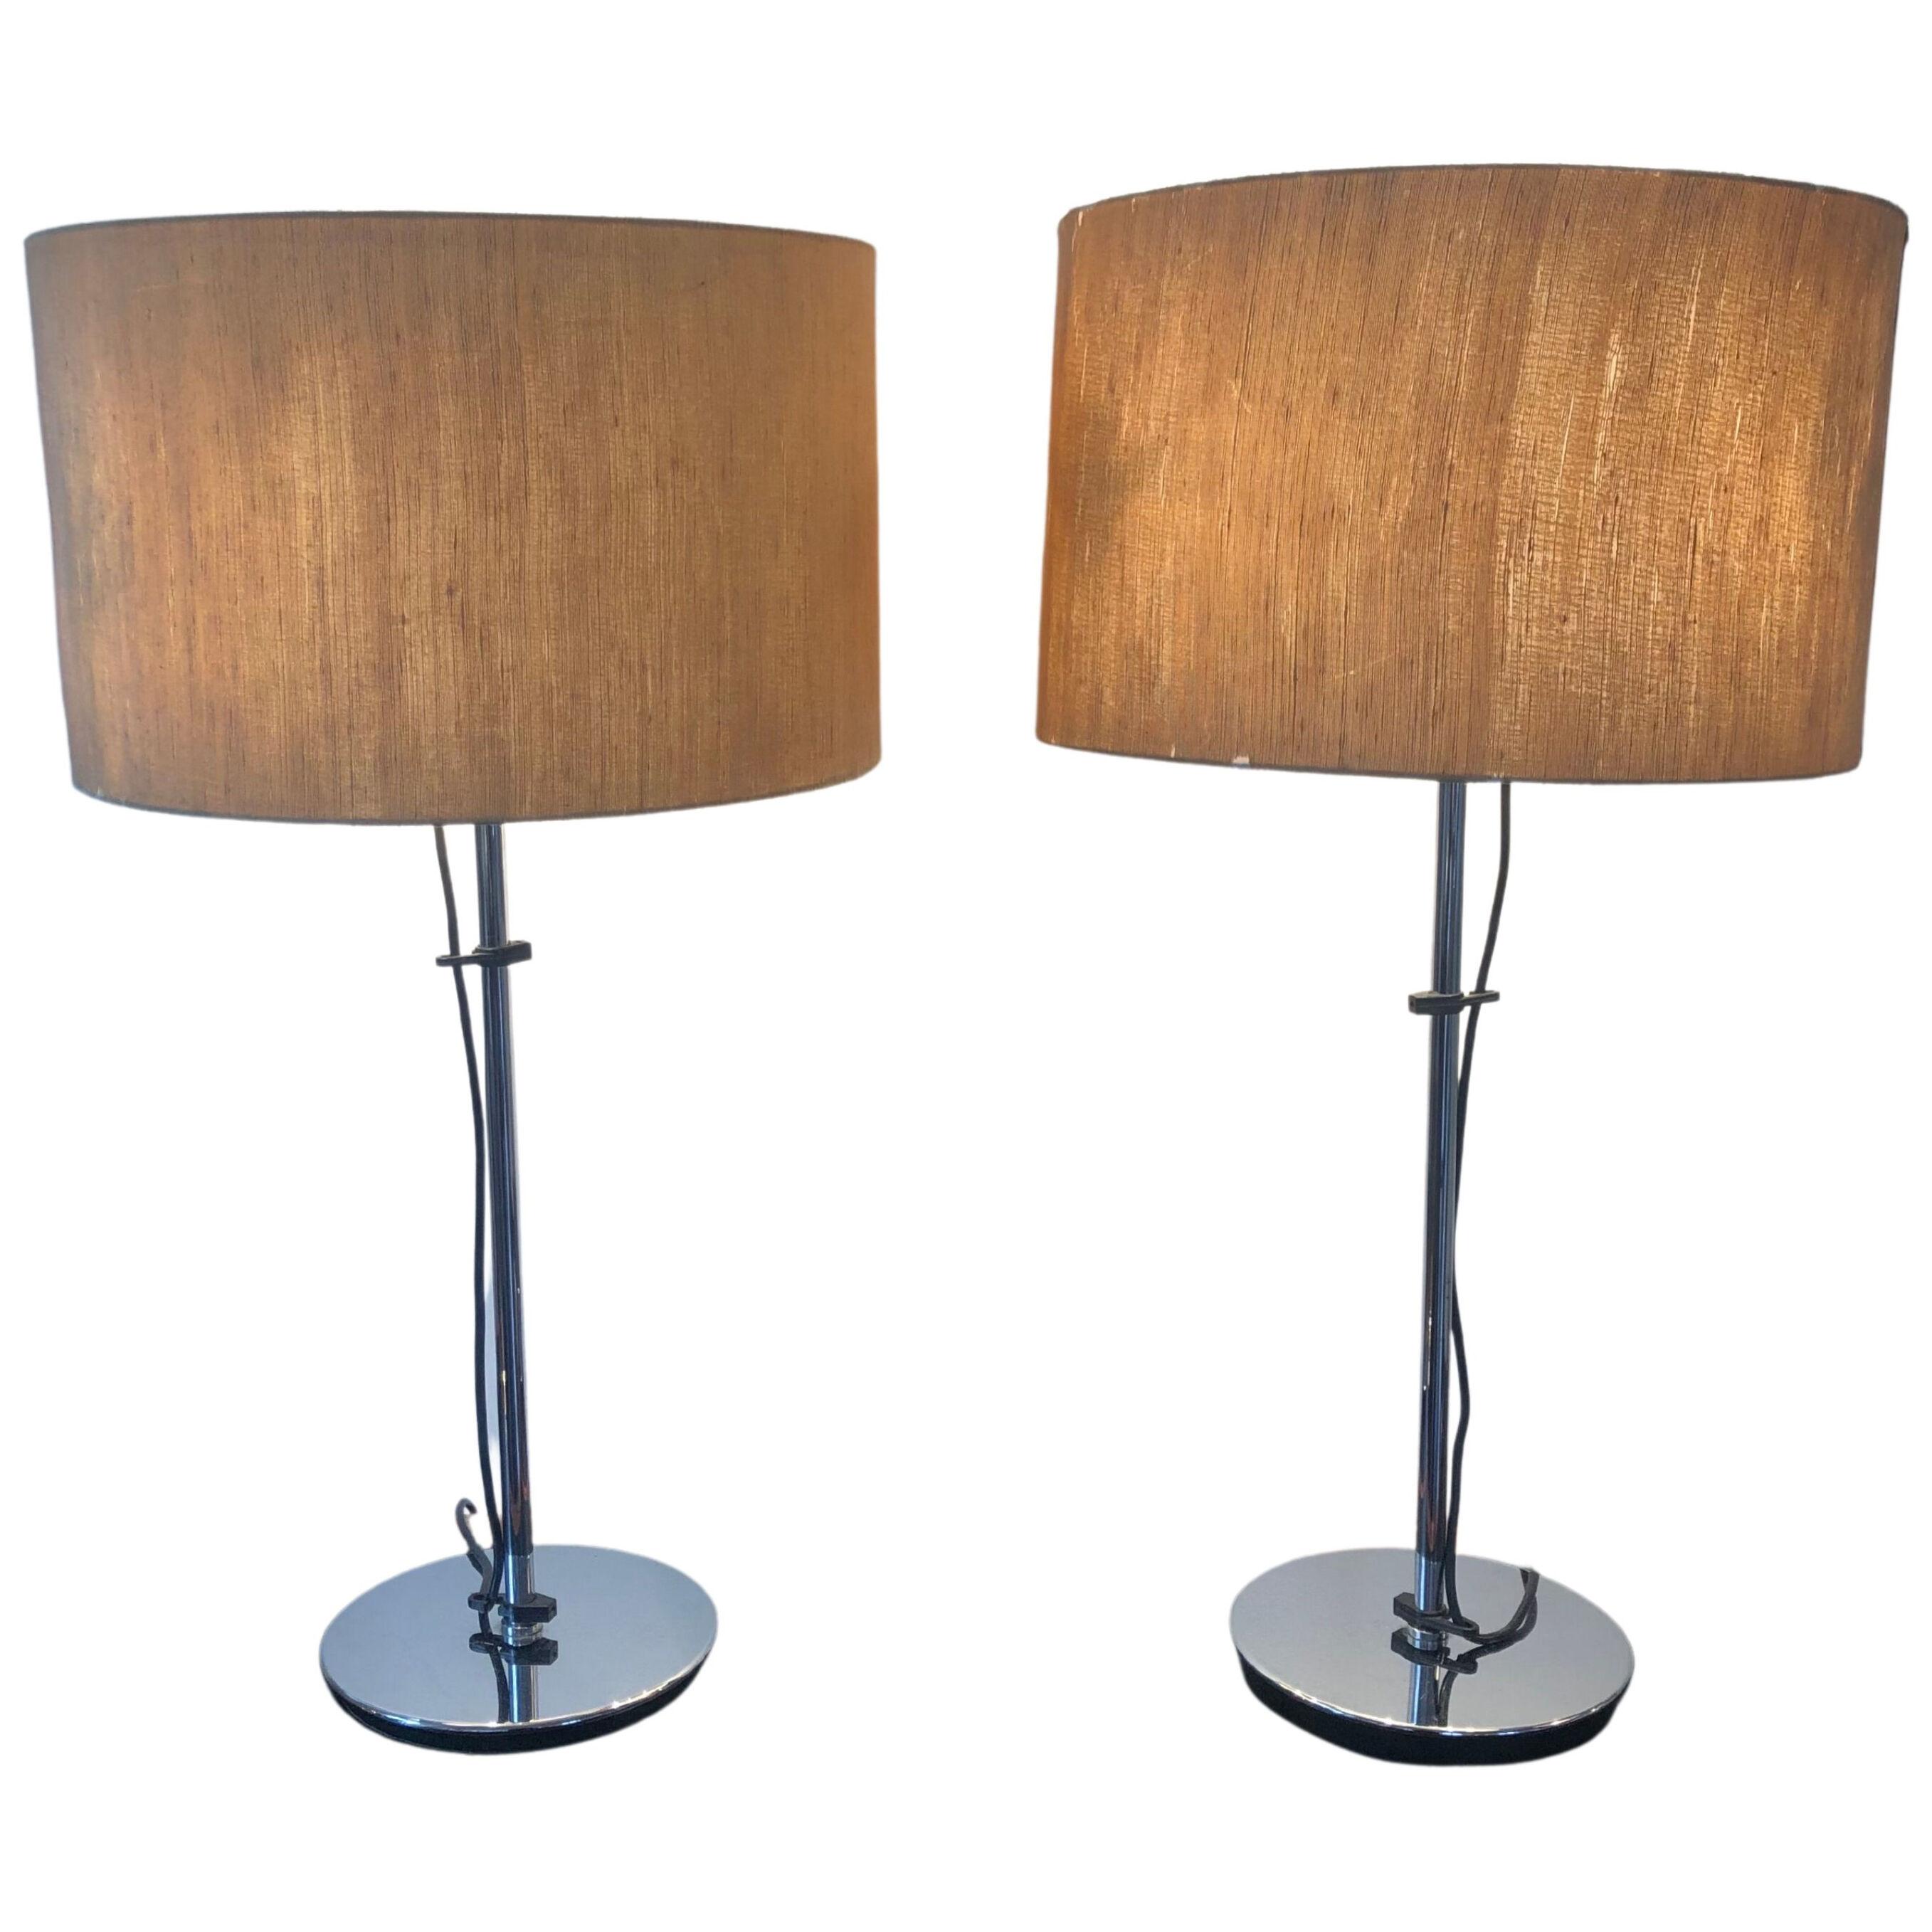 Set of 2 table lamps, circa 1970